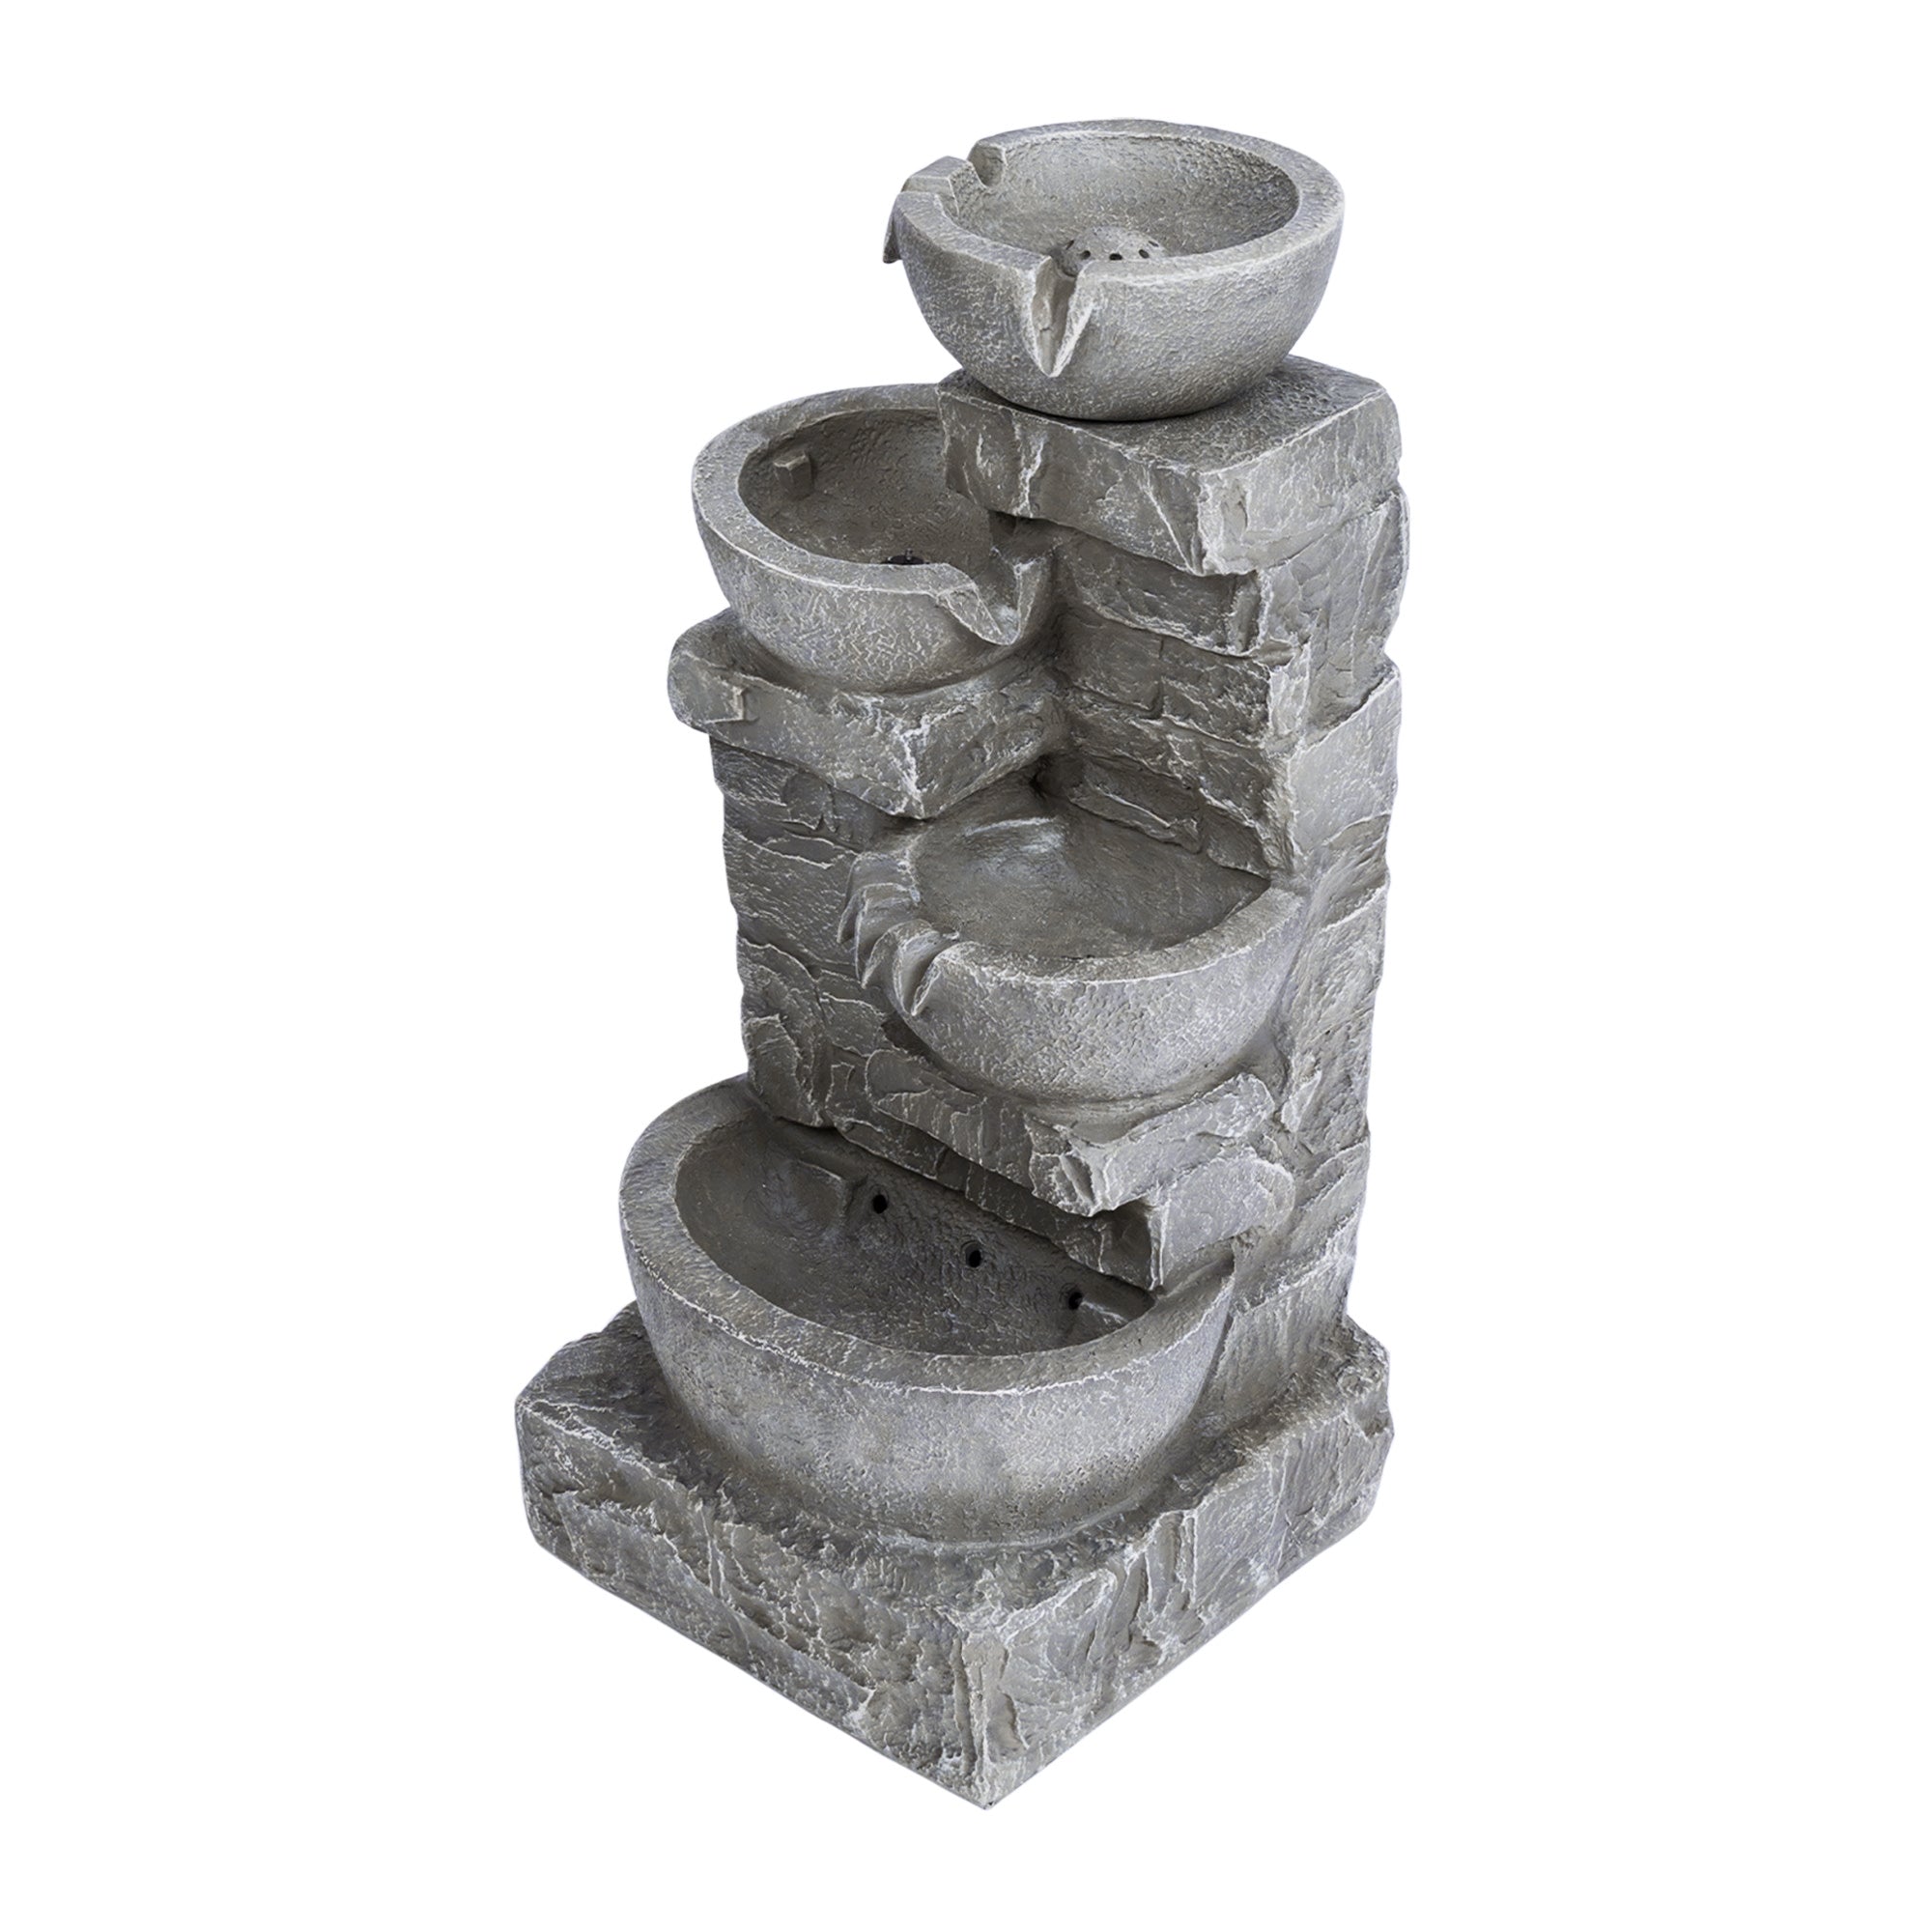 Teamson Home Outdoor Cascading Bowls & Stacked Stone Waterfall Fountain with Built-In LED Lights, Includes Water Pump, Gray